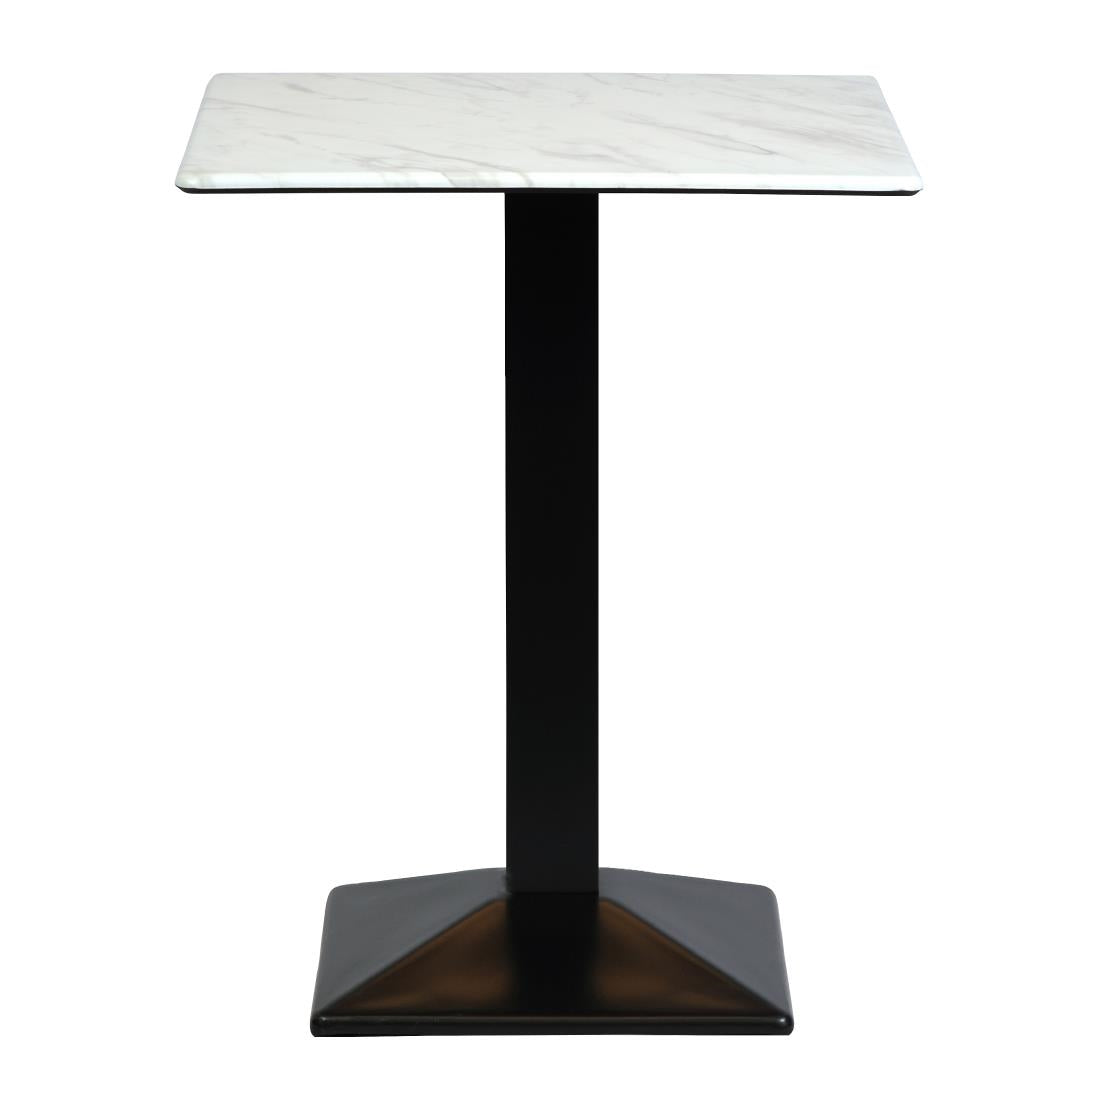 CZ826 Turin Metal Base Square Poseur Table with Laminate Top Marble 600mm JD Catering Equipment Solutions Ltd